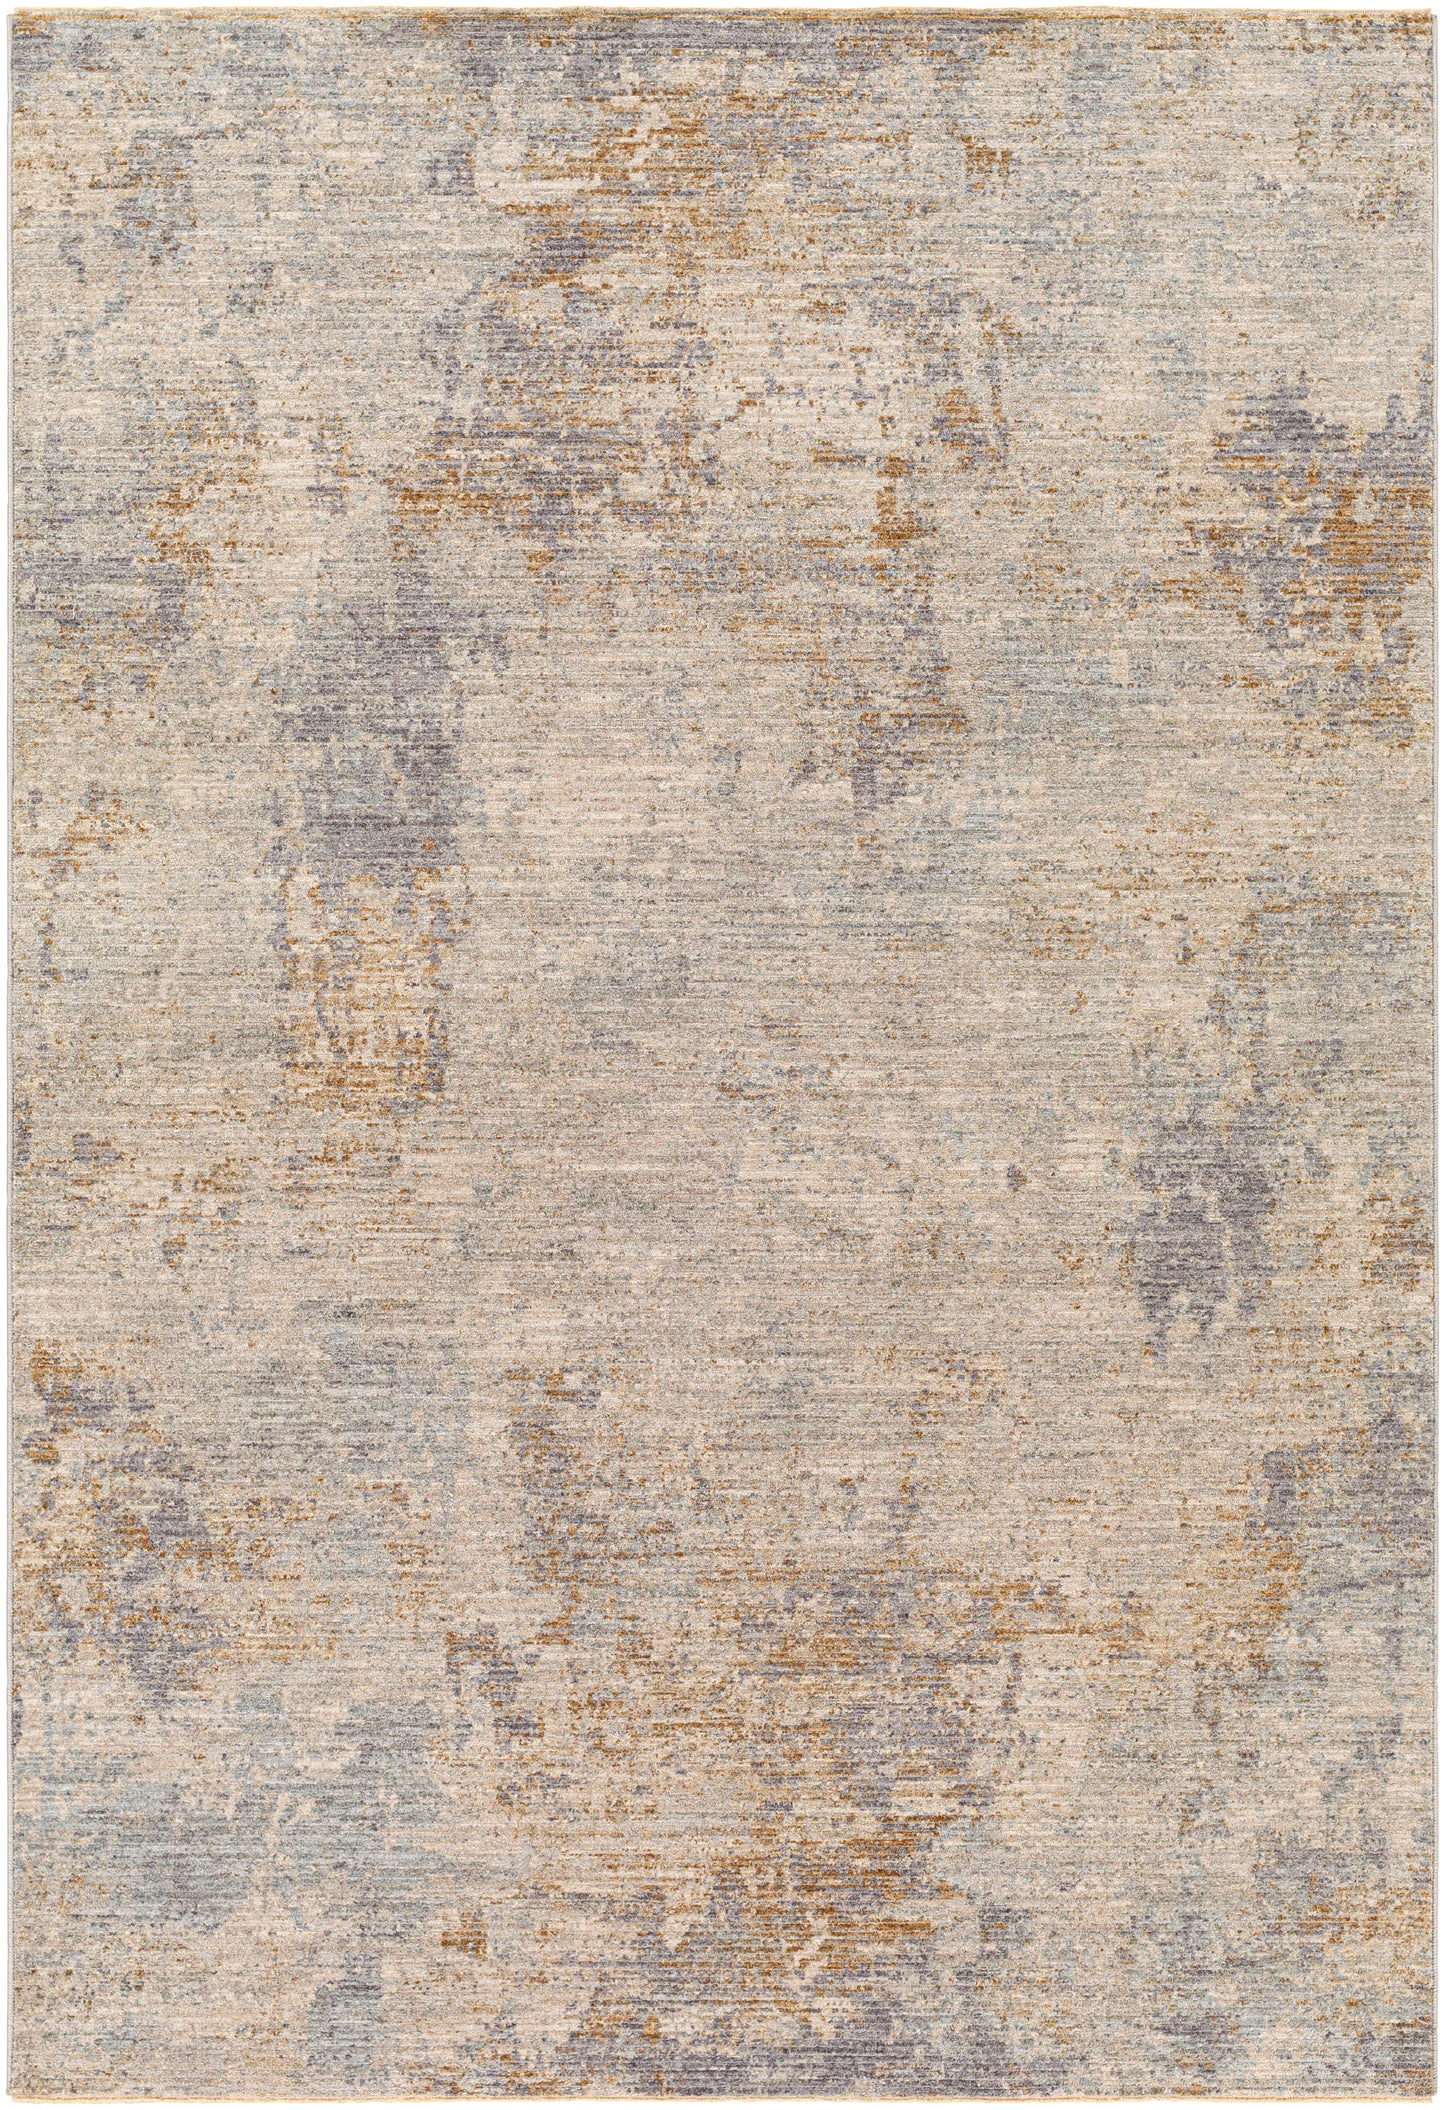 Avant Garde 30989 Machine Woven Synthetic Blend Indoor Area Rug by Surya Rugs